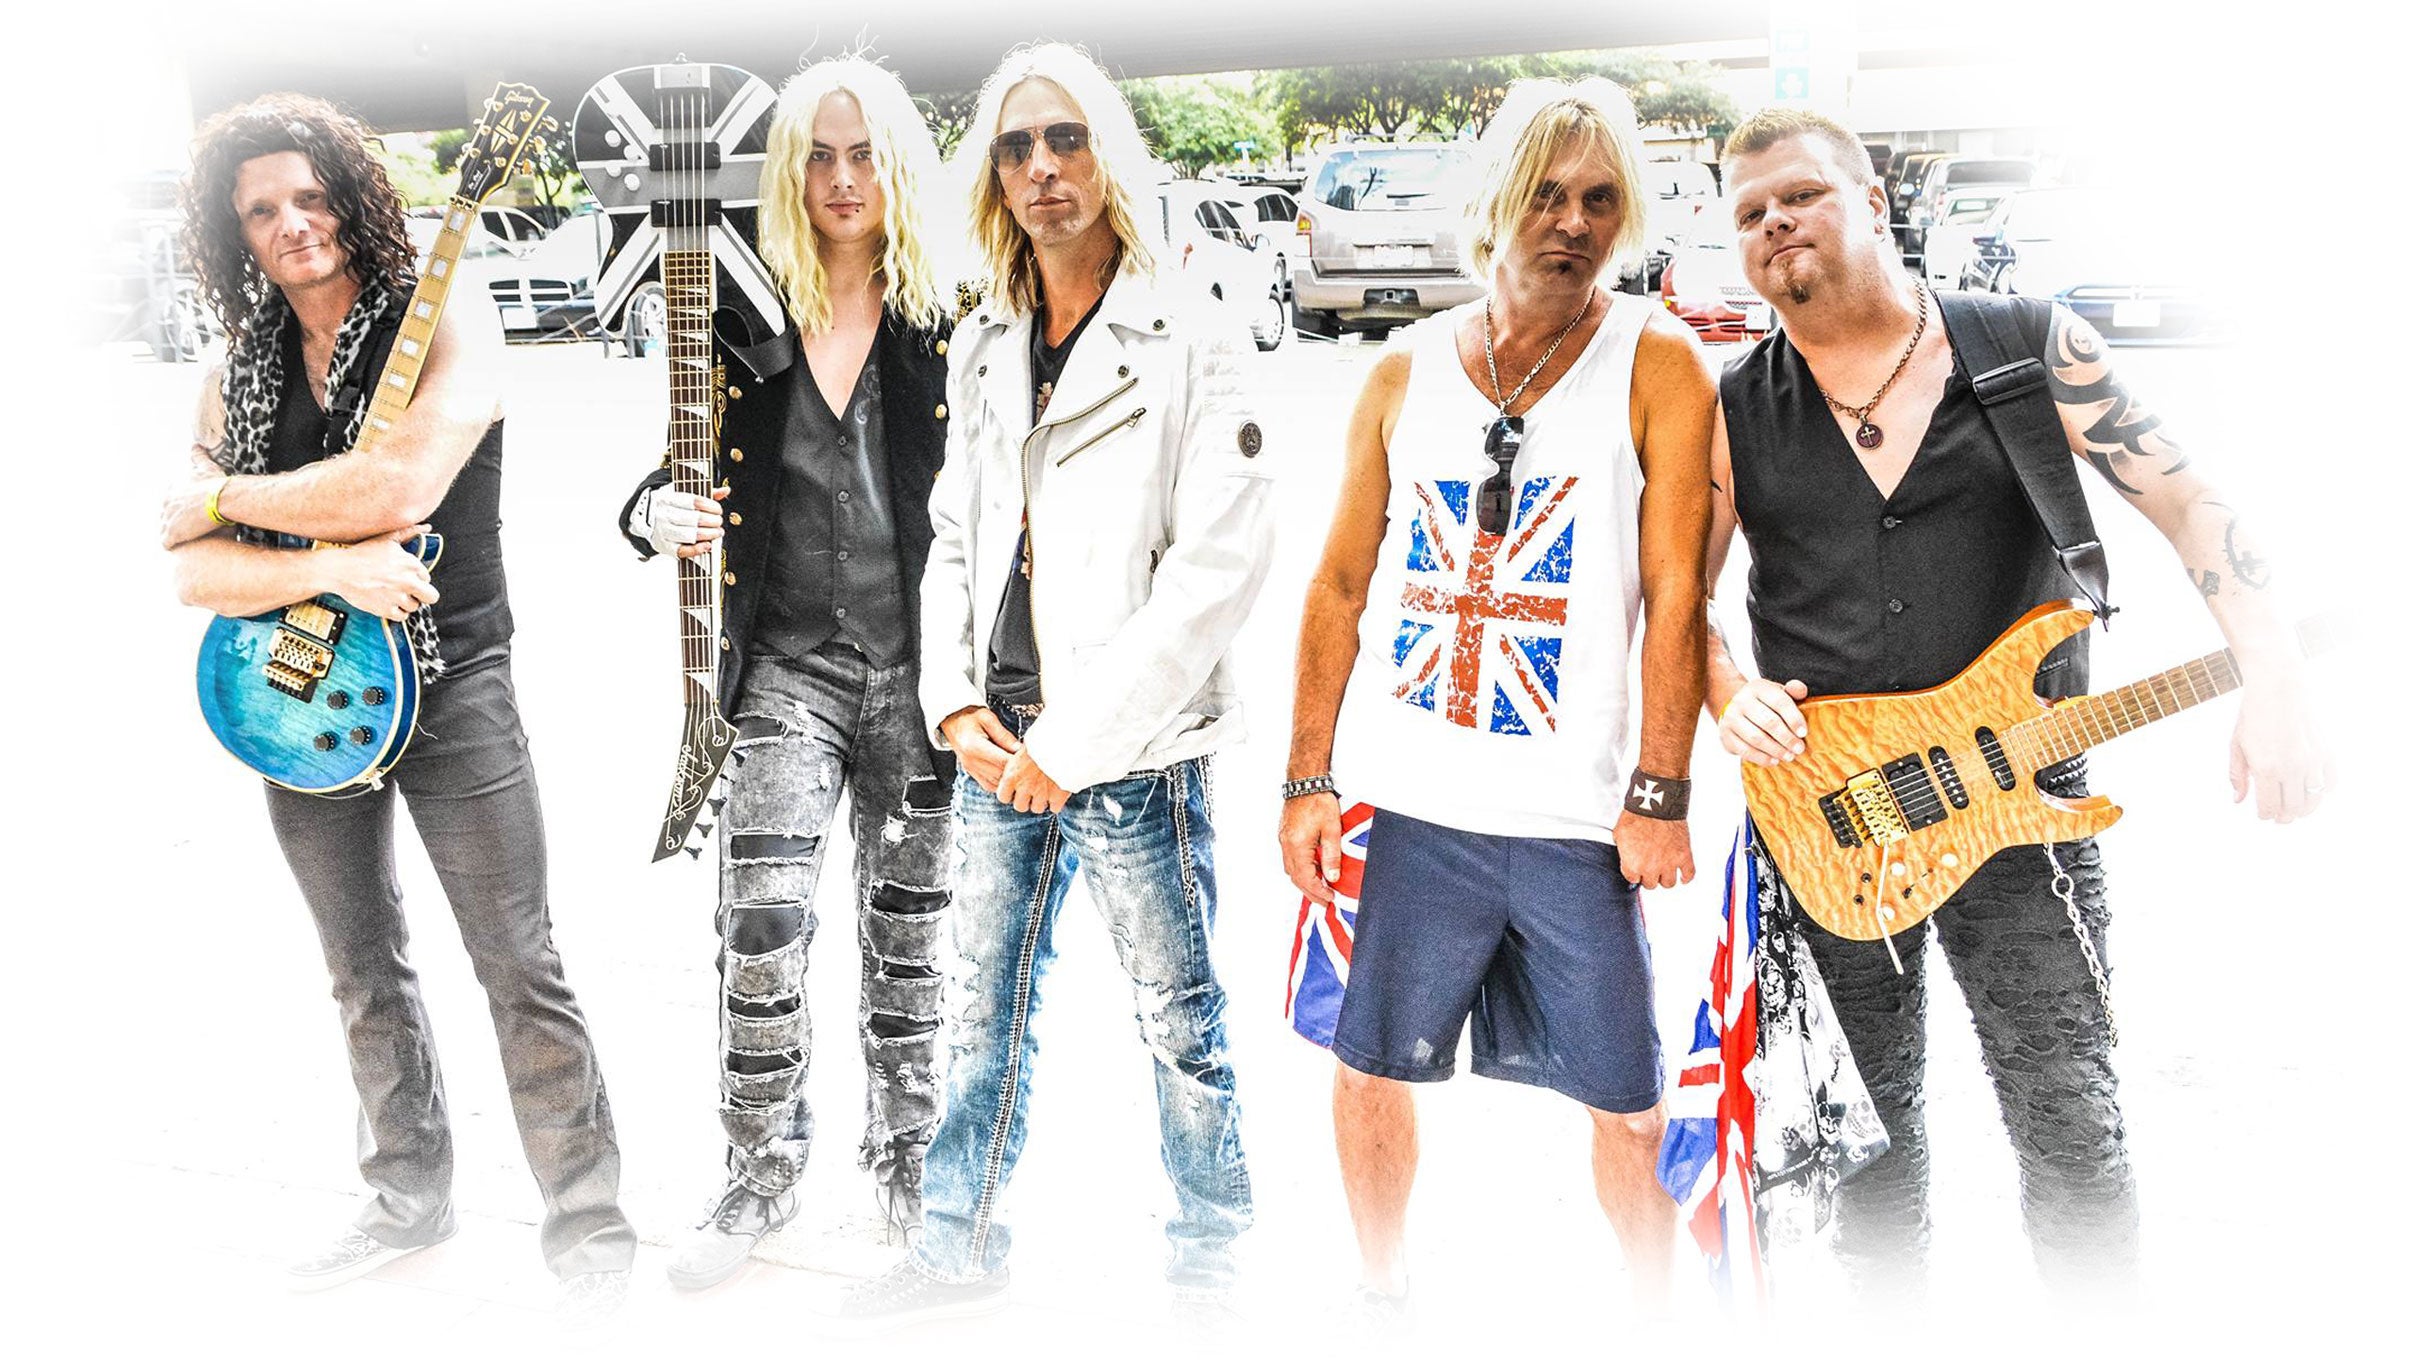 Def Leggend - The World's Greatest Tribute To Def Leppard in Louisville promo photo for HOB Foundation Room presale offer code